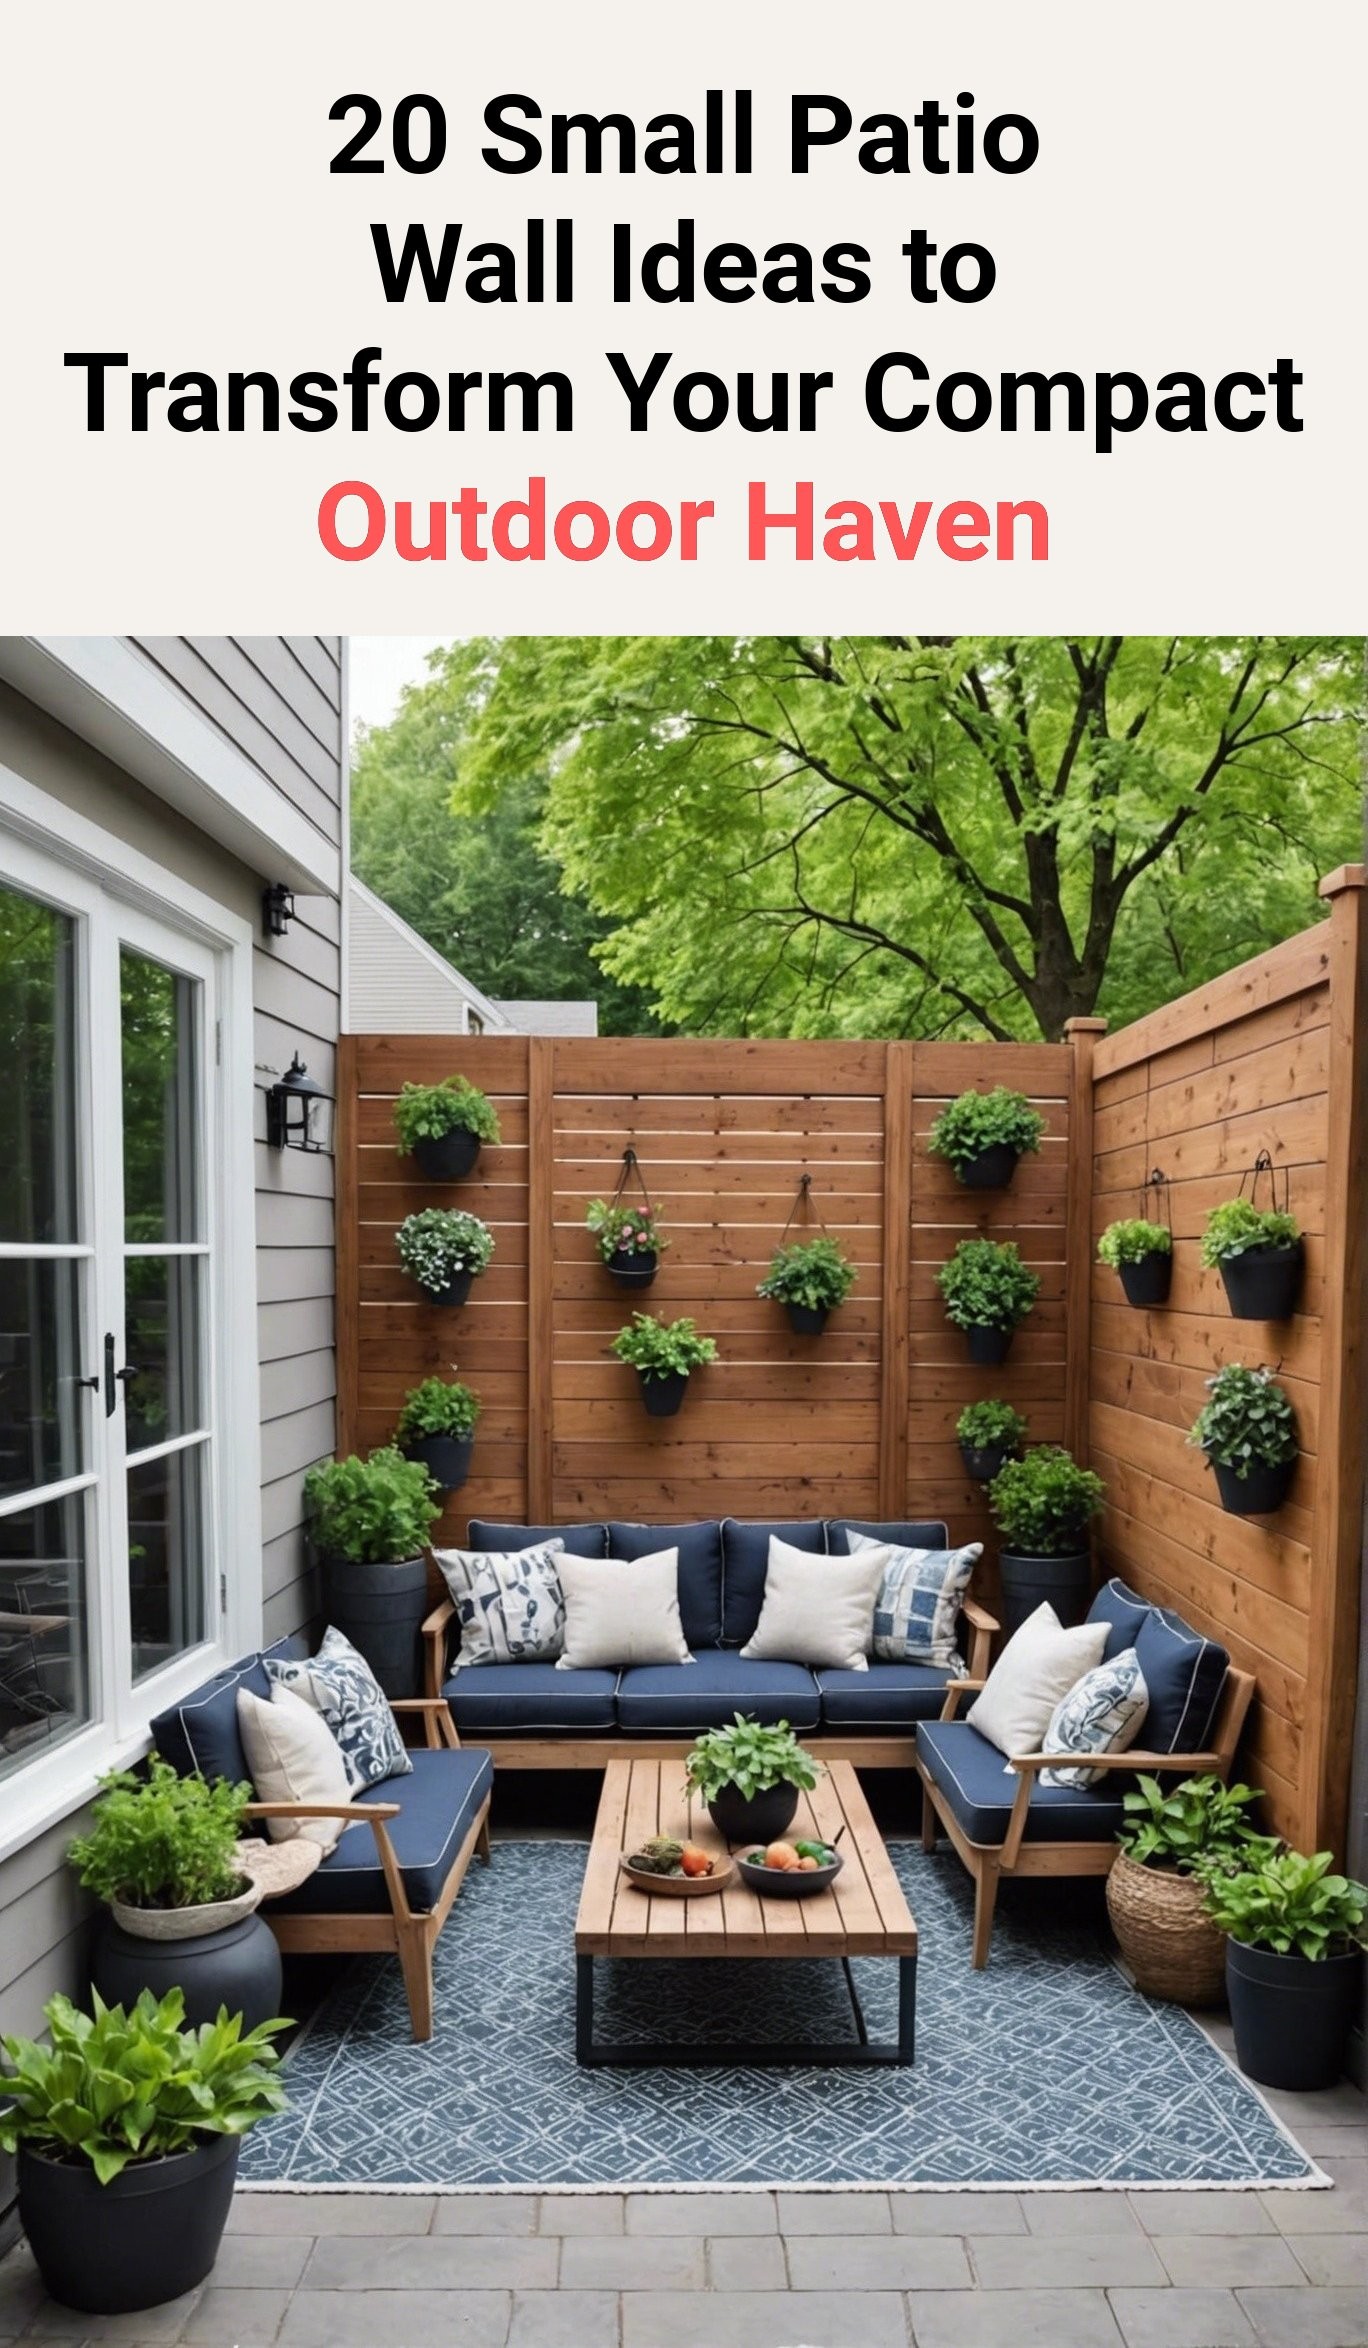 20 Small Patio Wall Ideas to Transform Your Compact Outdoor Haven